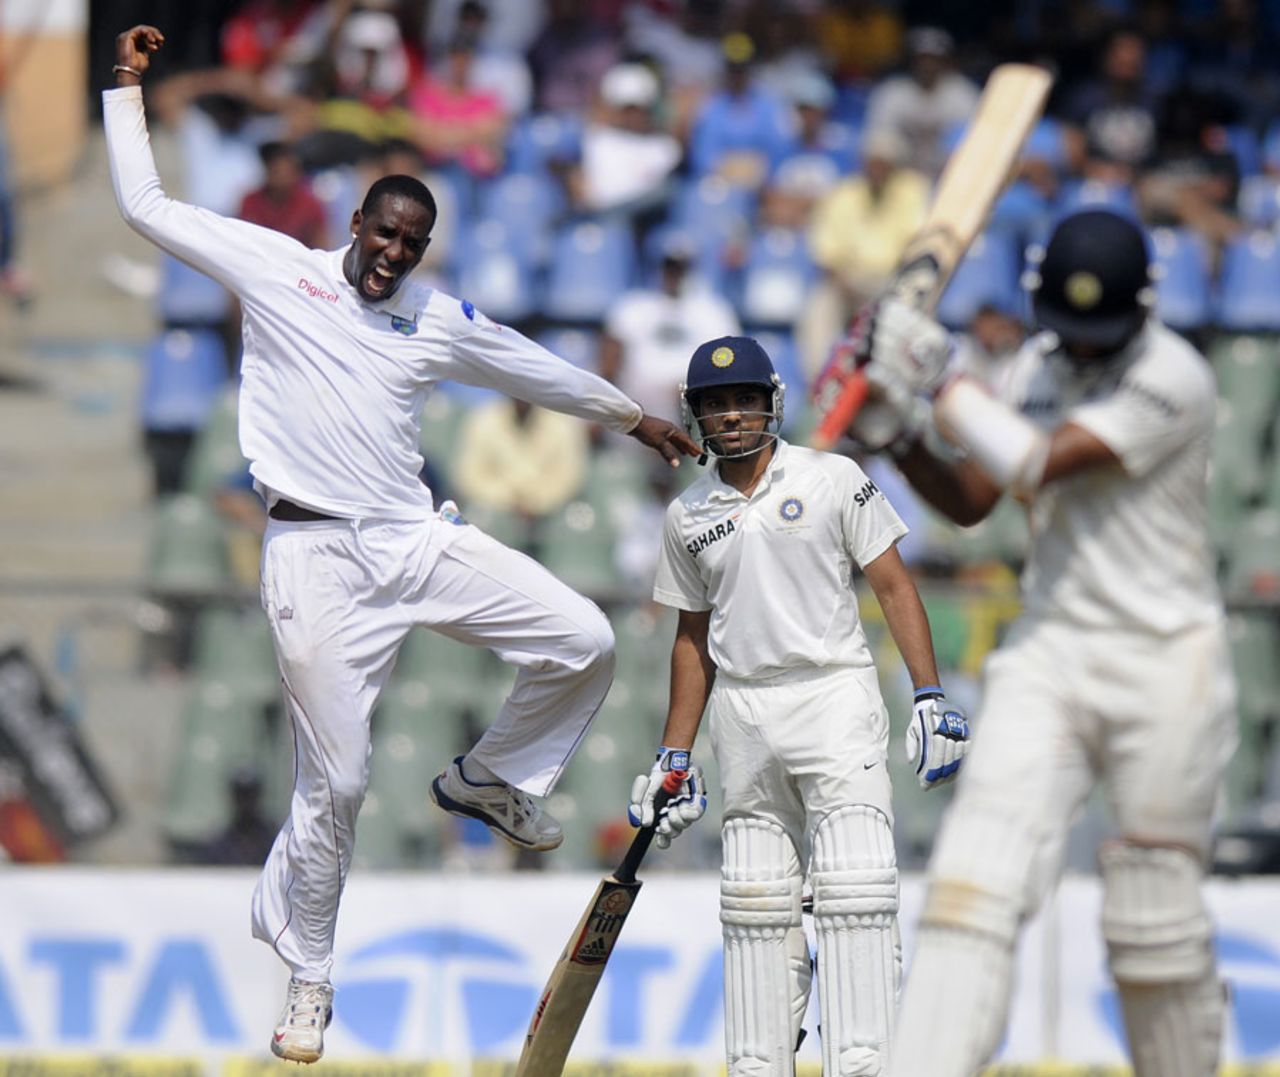 Shane Shillingford picked up five wickets, India v West Indies, 2nd Test, Mumbai, 2nd day, November 15, 2013